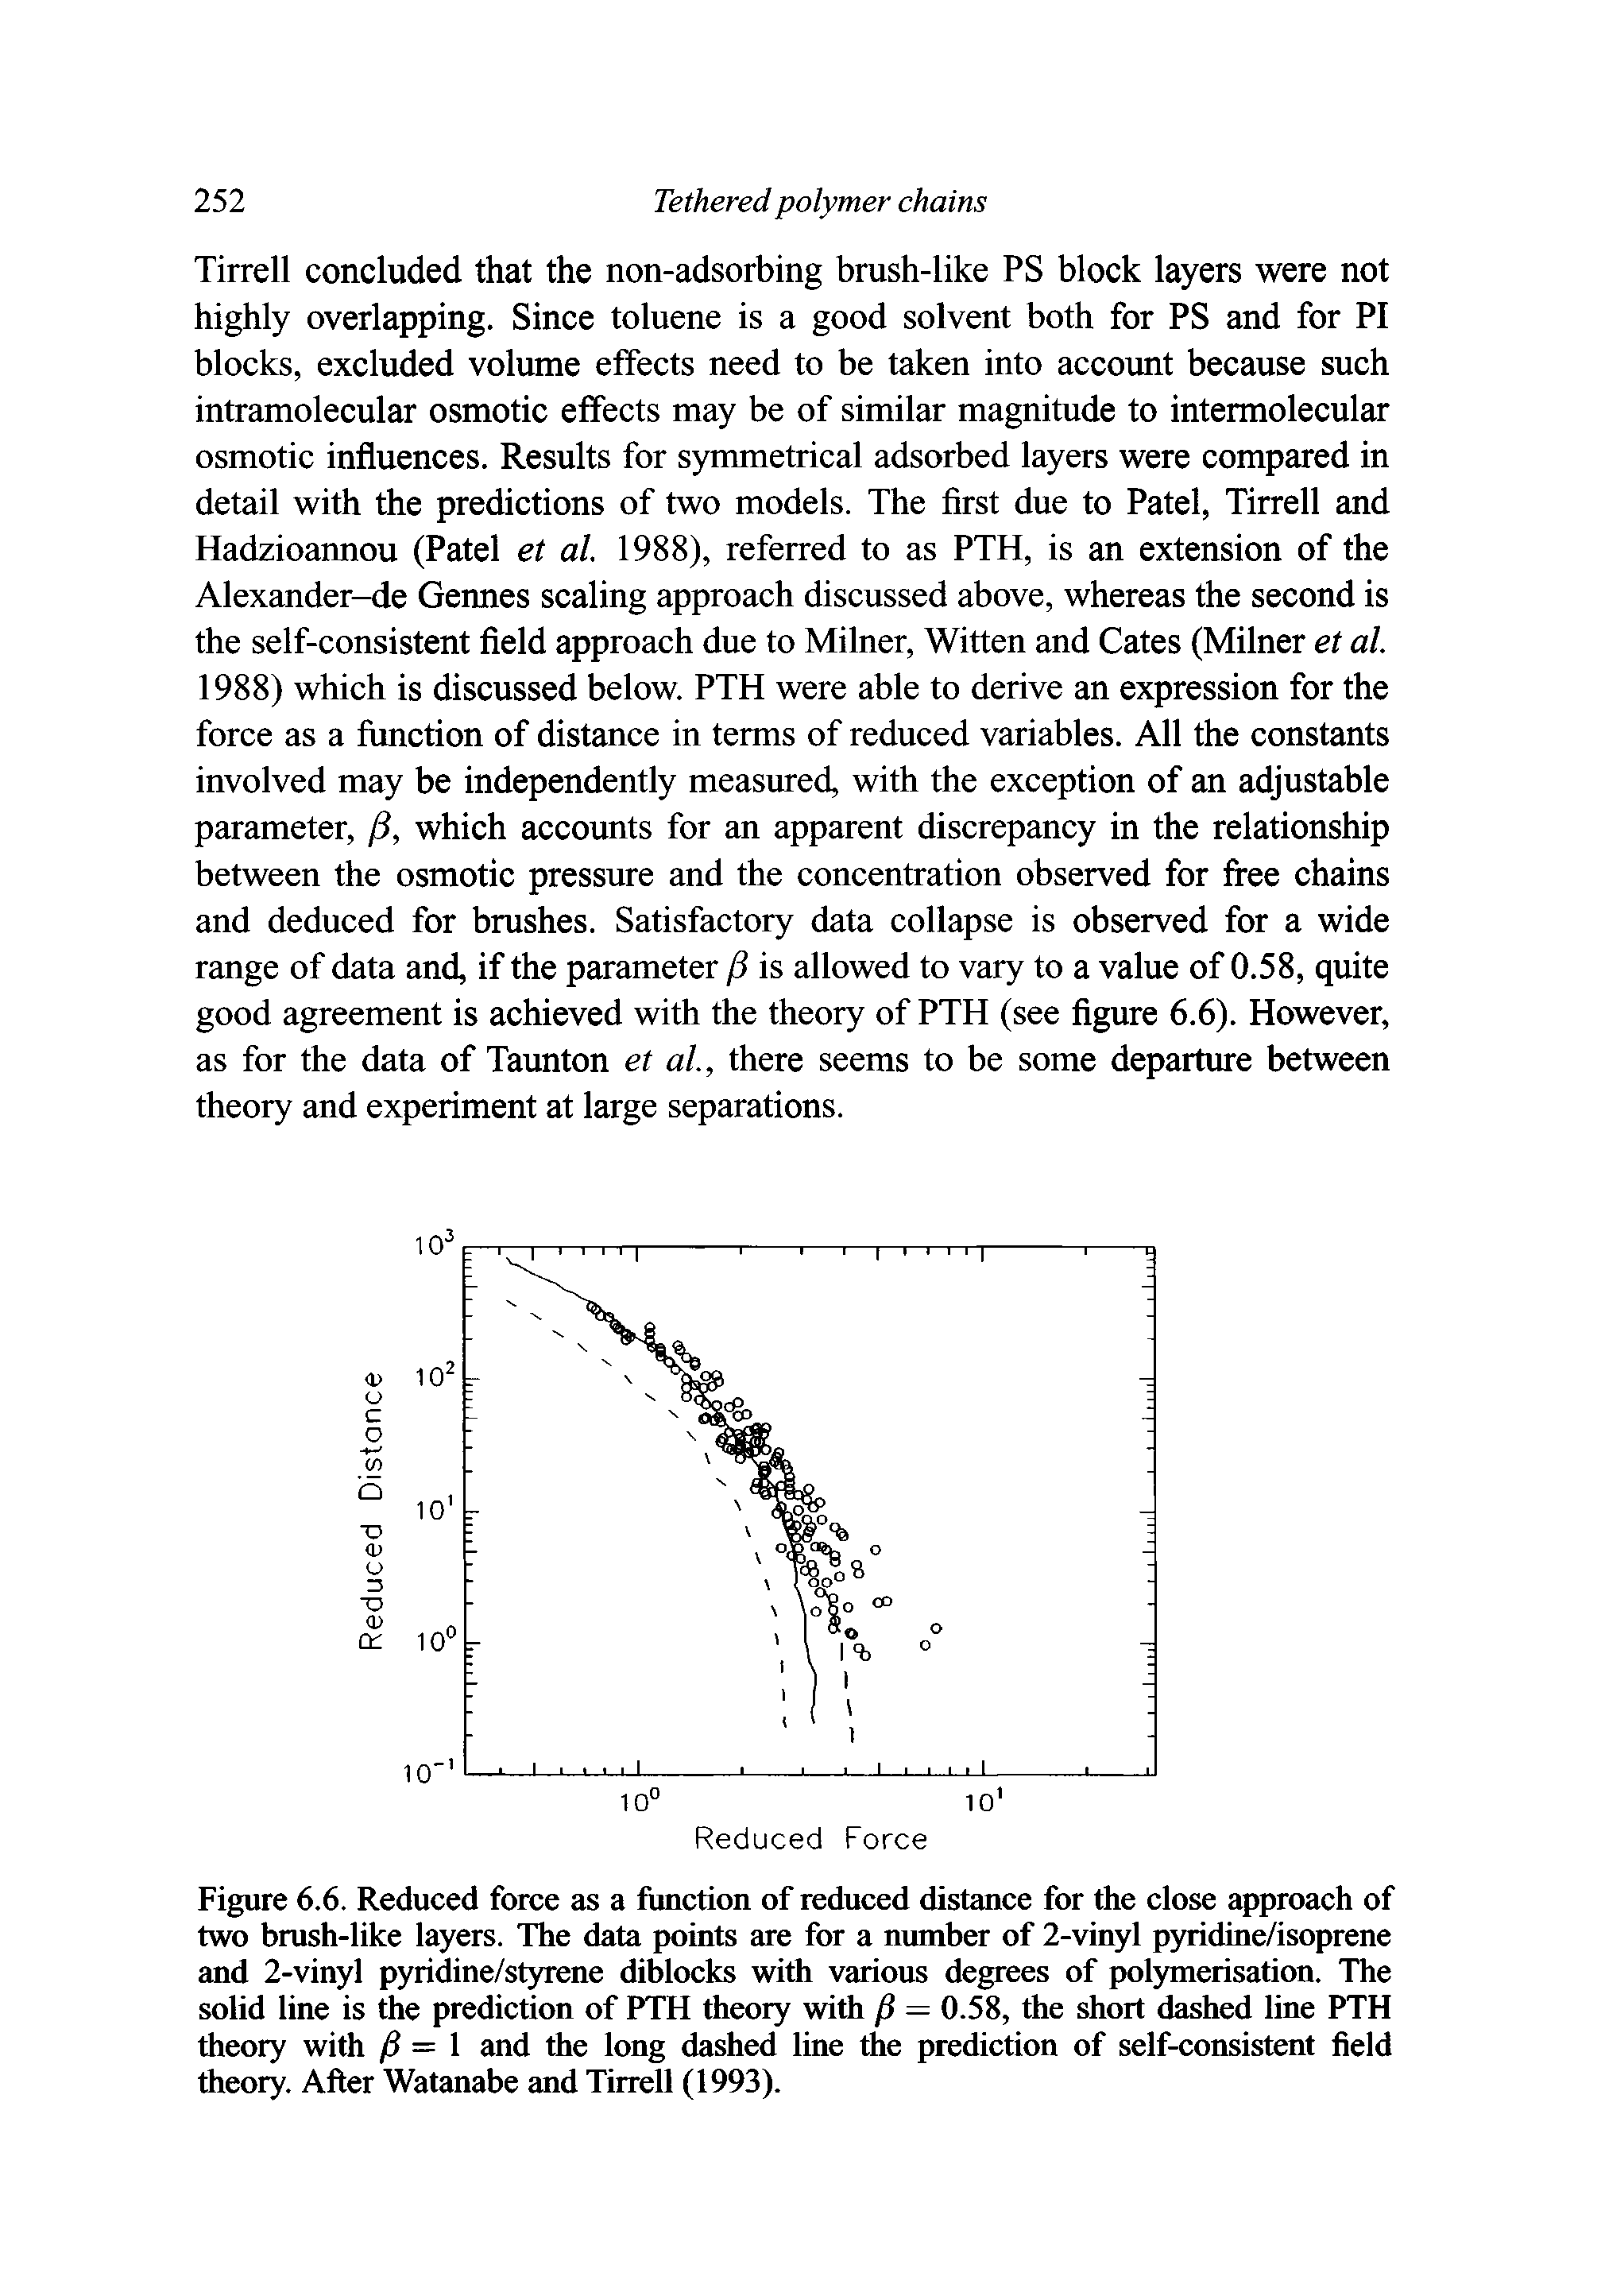 Figure 6.6. Reduced force as a function of reduced distance for the close approach of two brush-like layers. The data points are for a number of 2-vinyl pyridine/isoprene and 2-vinyl pyridine/styrene diblocks with various degrees of polymerisation. The solid line is the prediction of PTH theory with — 0.58, the short dashed line PTH theory with = 1 and the long dashed line the prediction of self-consistent field theory. After Watanabe and Tirrell (1993).